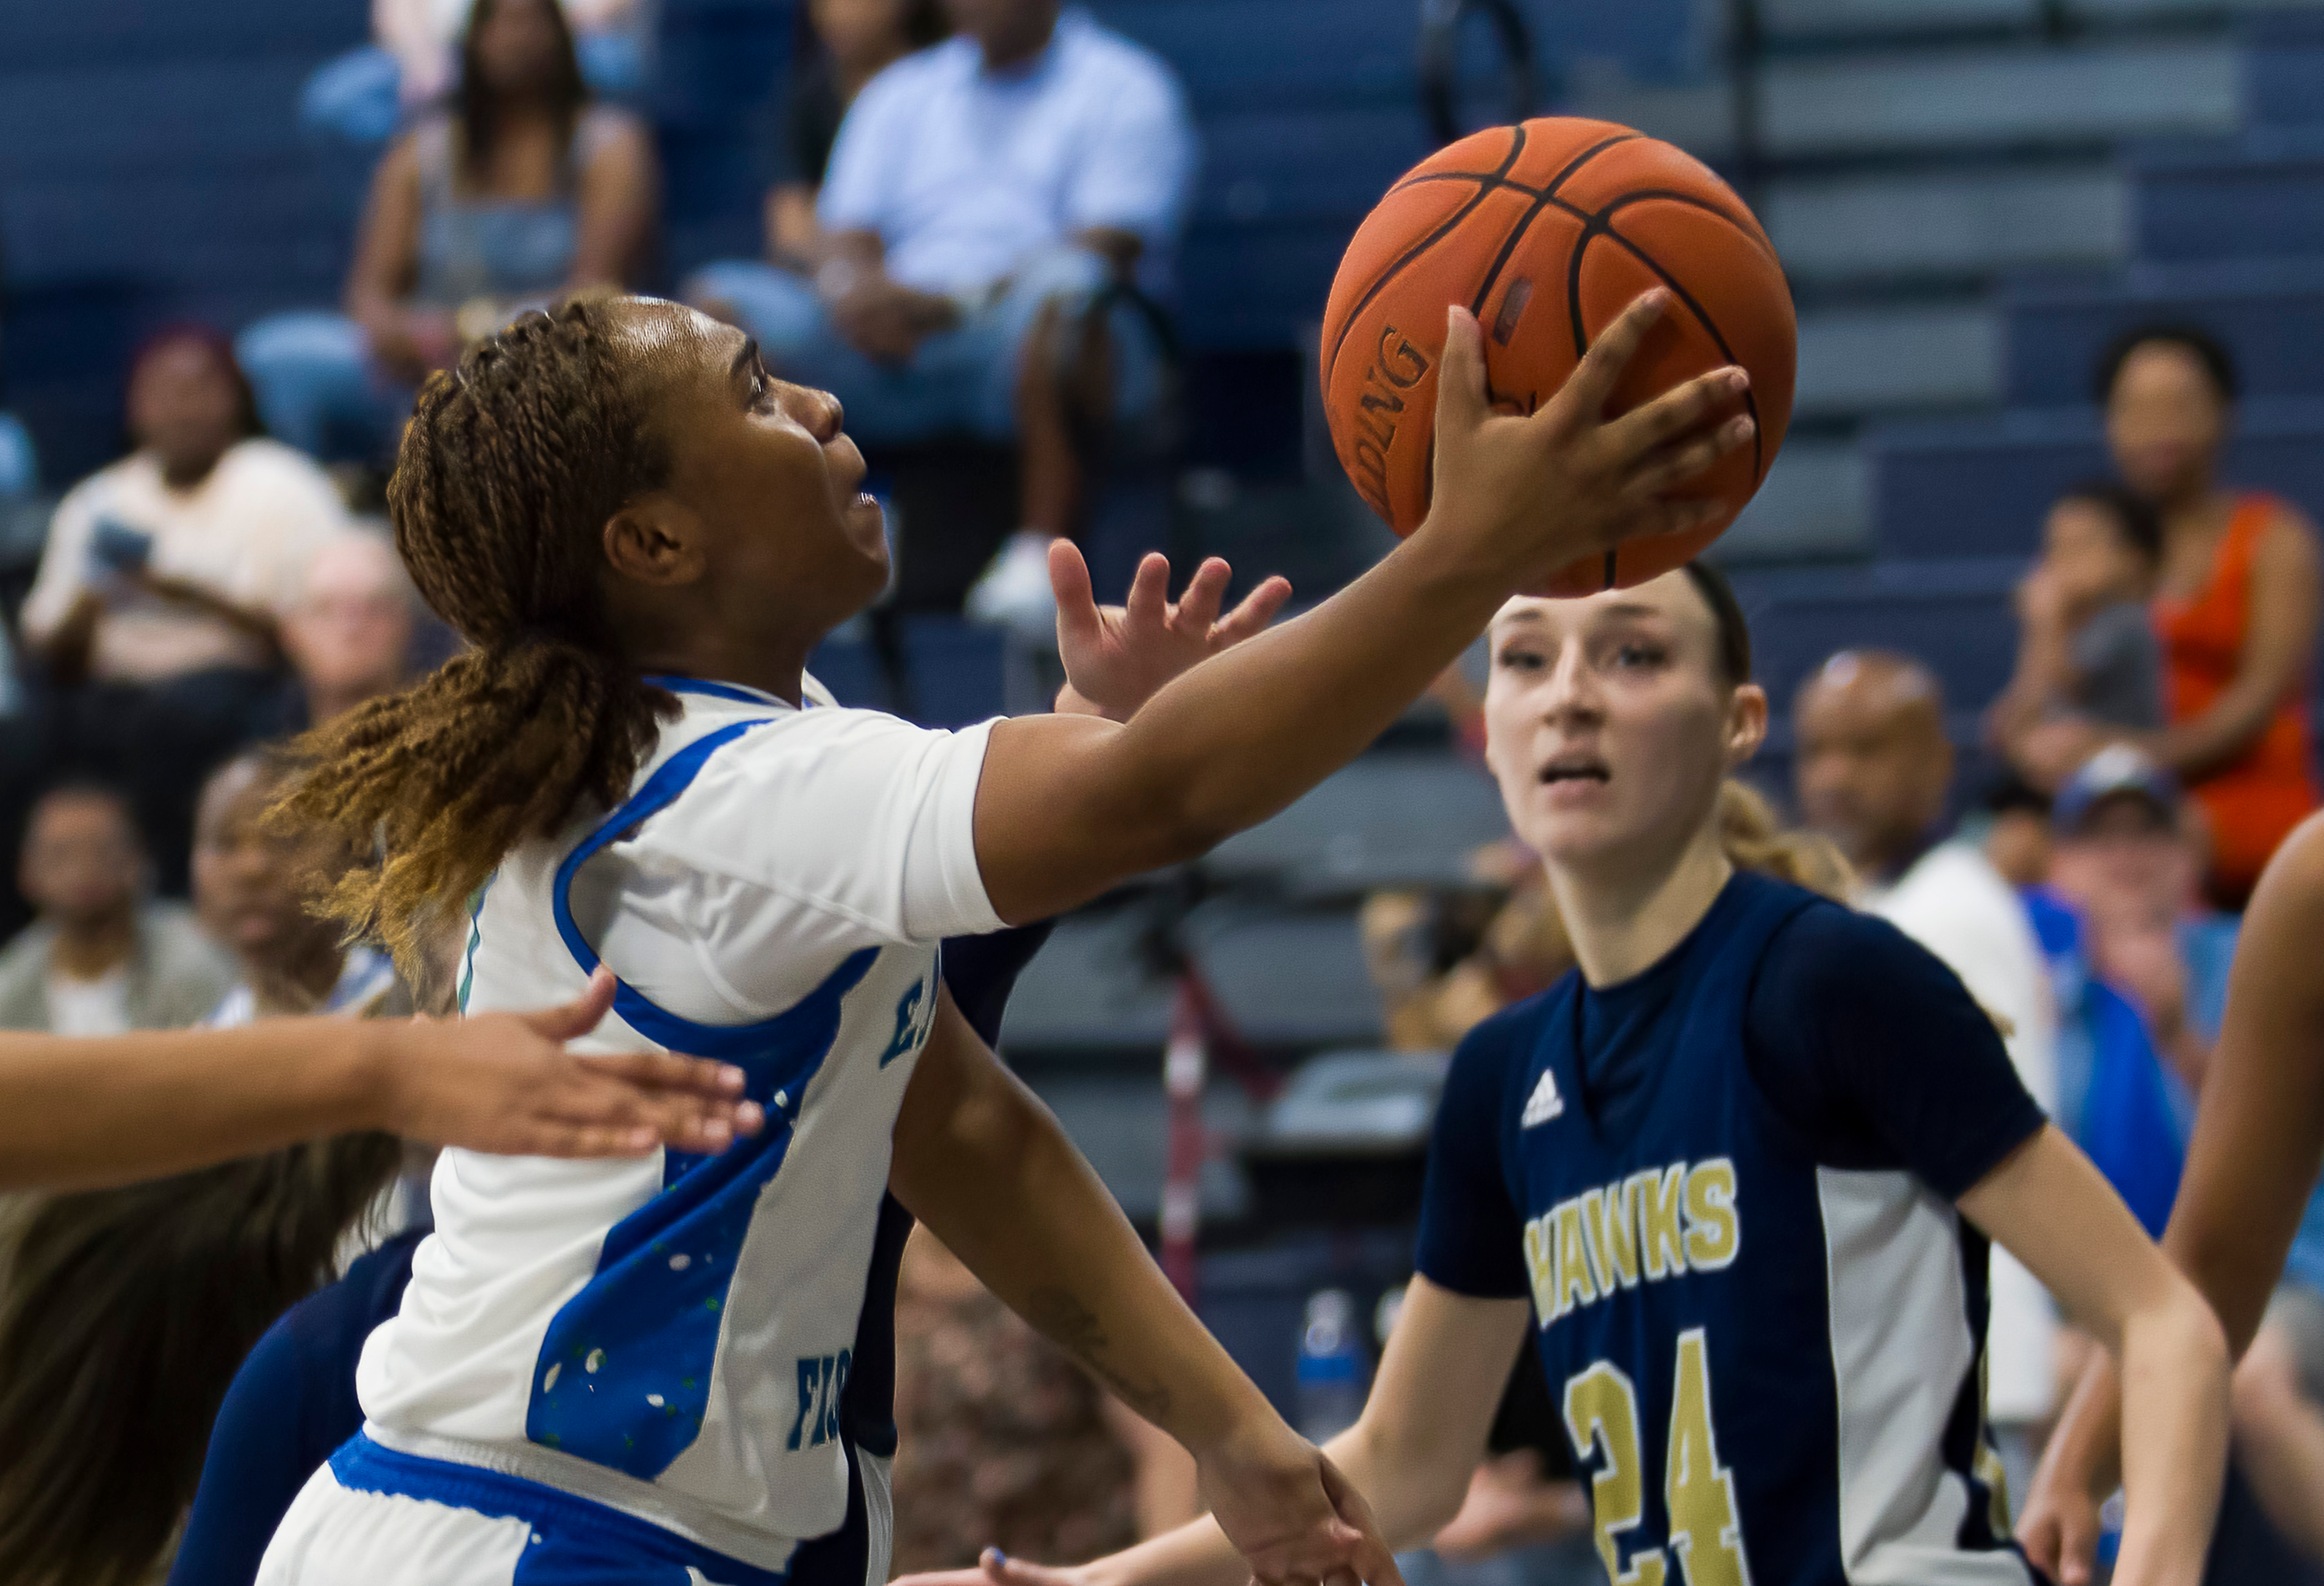 Women's basketball team hits road for final conference game